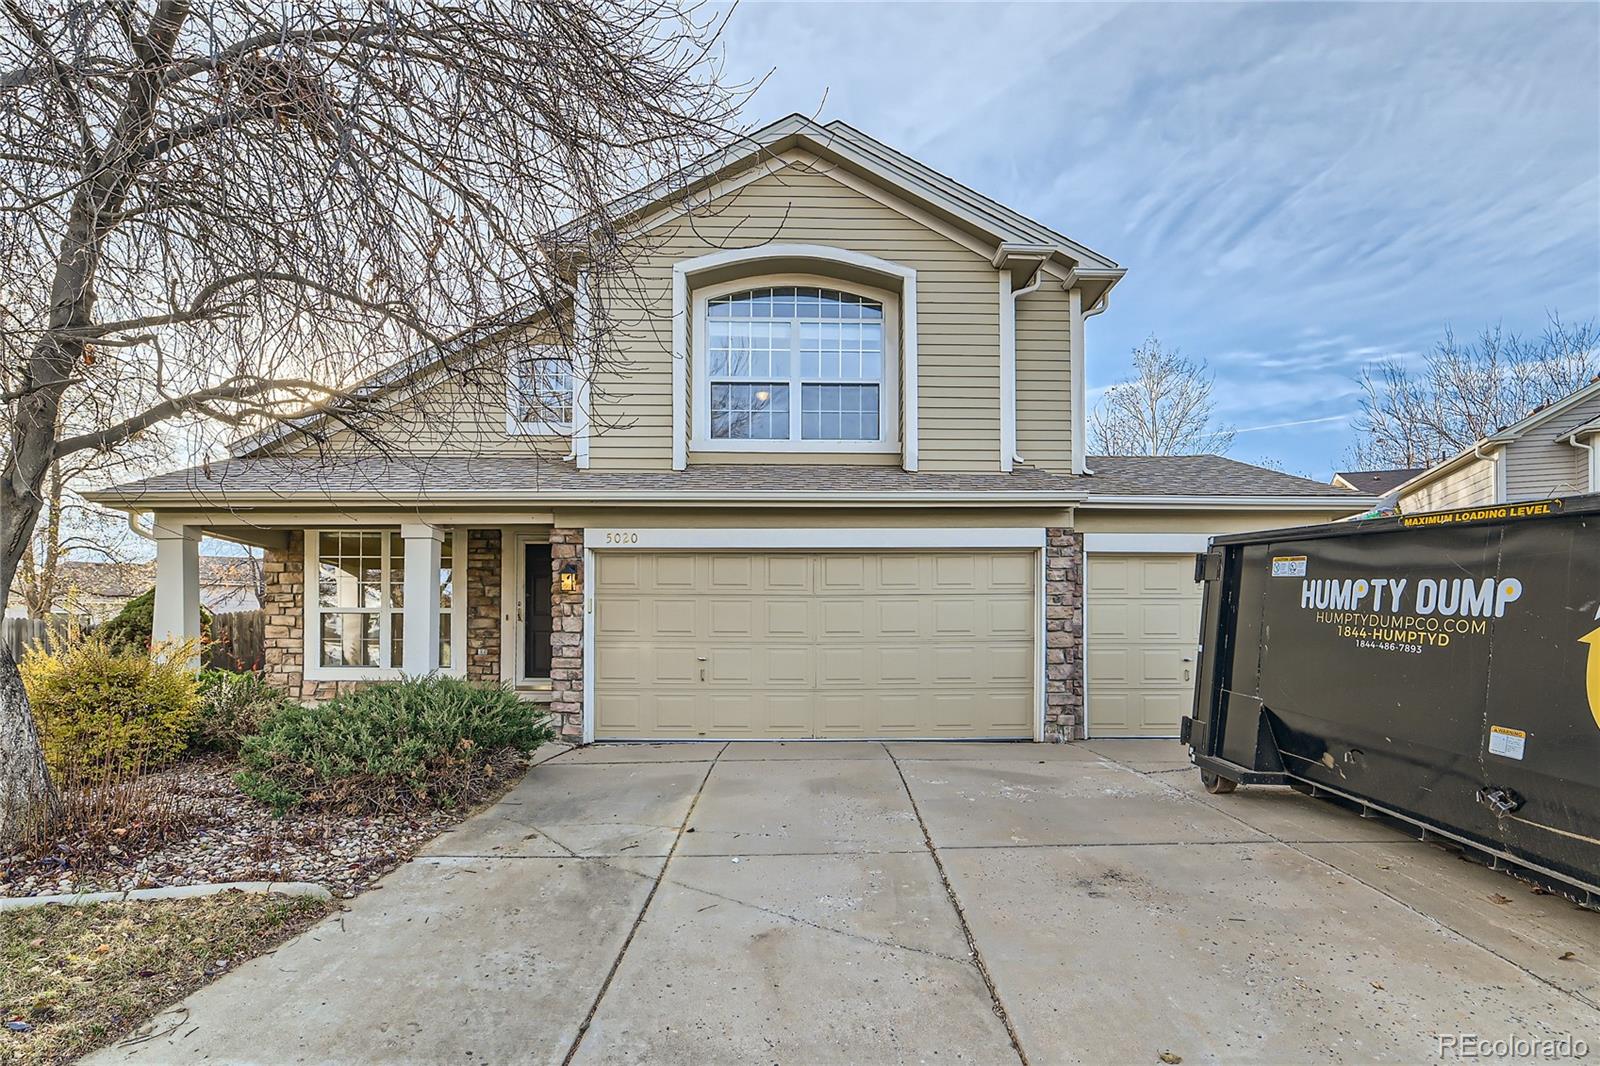 5020 W 128th Place, broomfield MLS: 8776410 Beds: 3 Baths: 3 Price: $624,999